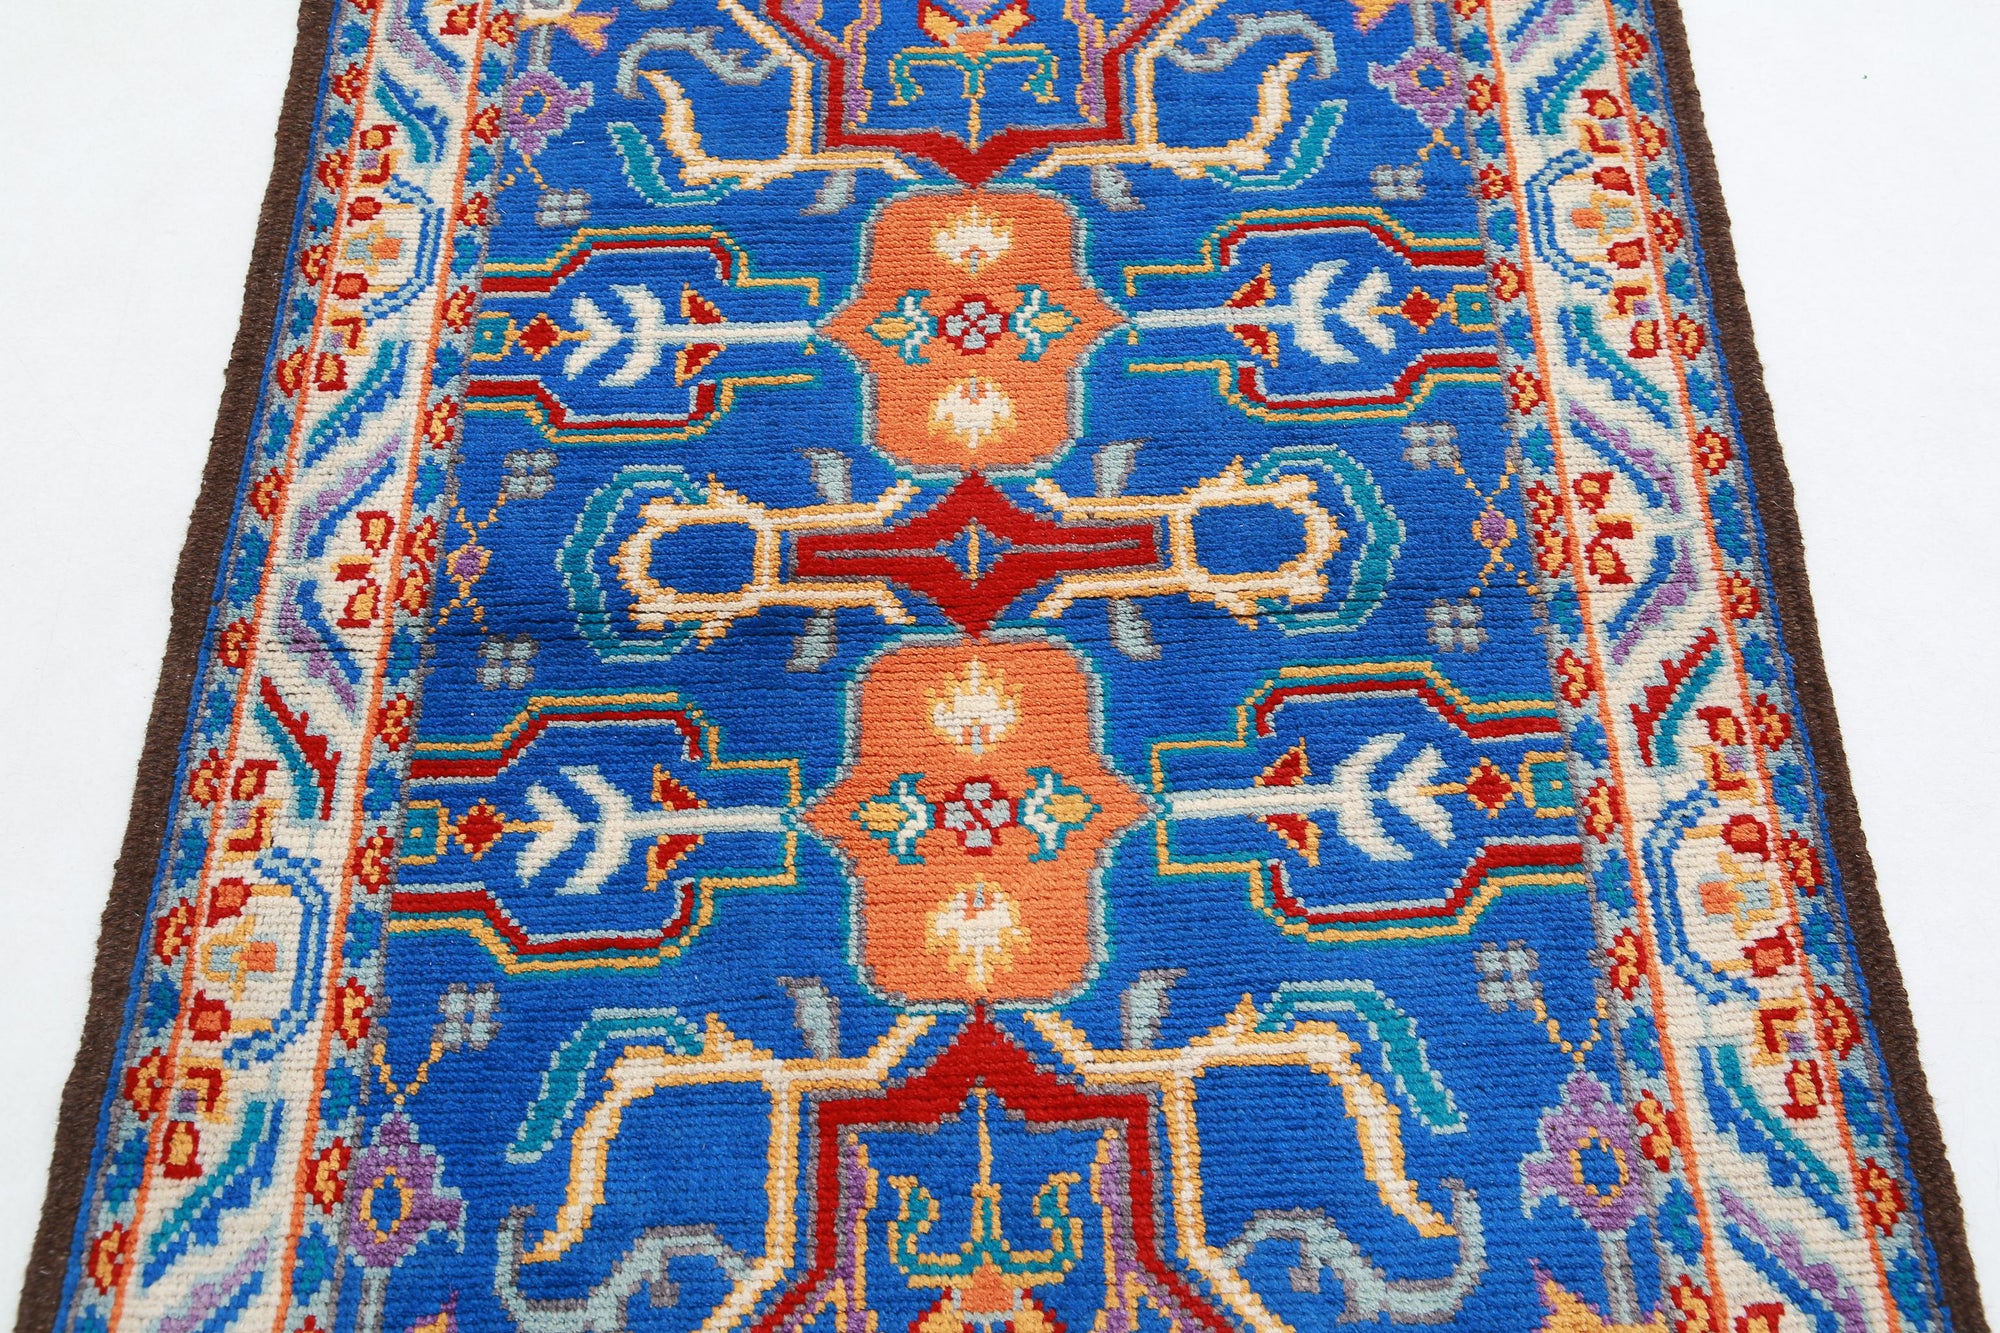 Revival-hand-knotted-qarghani-wool-rug-5014201-4.jpg